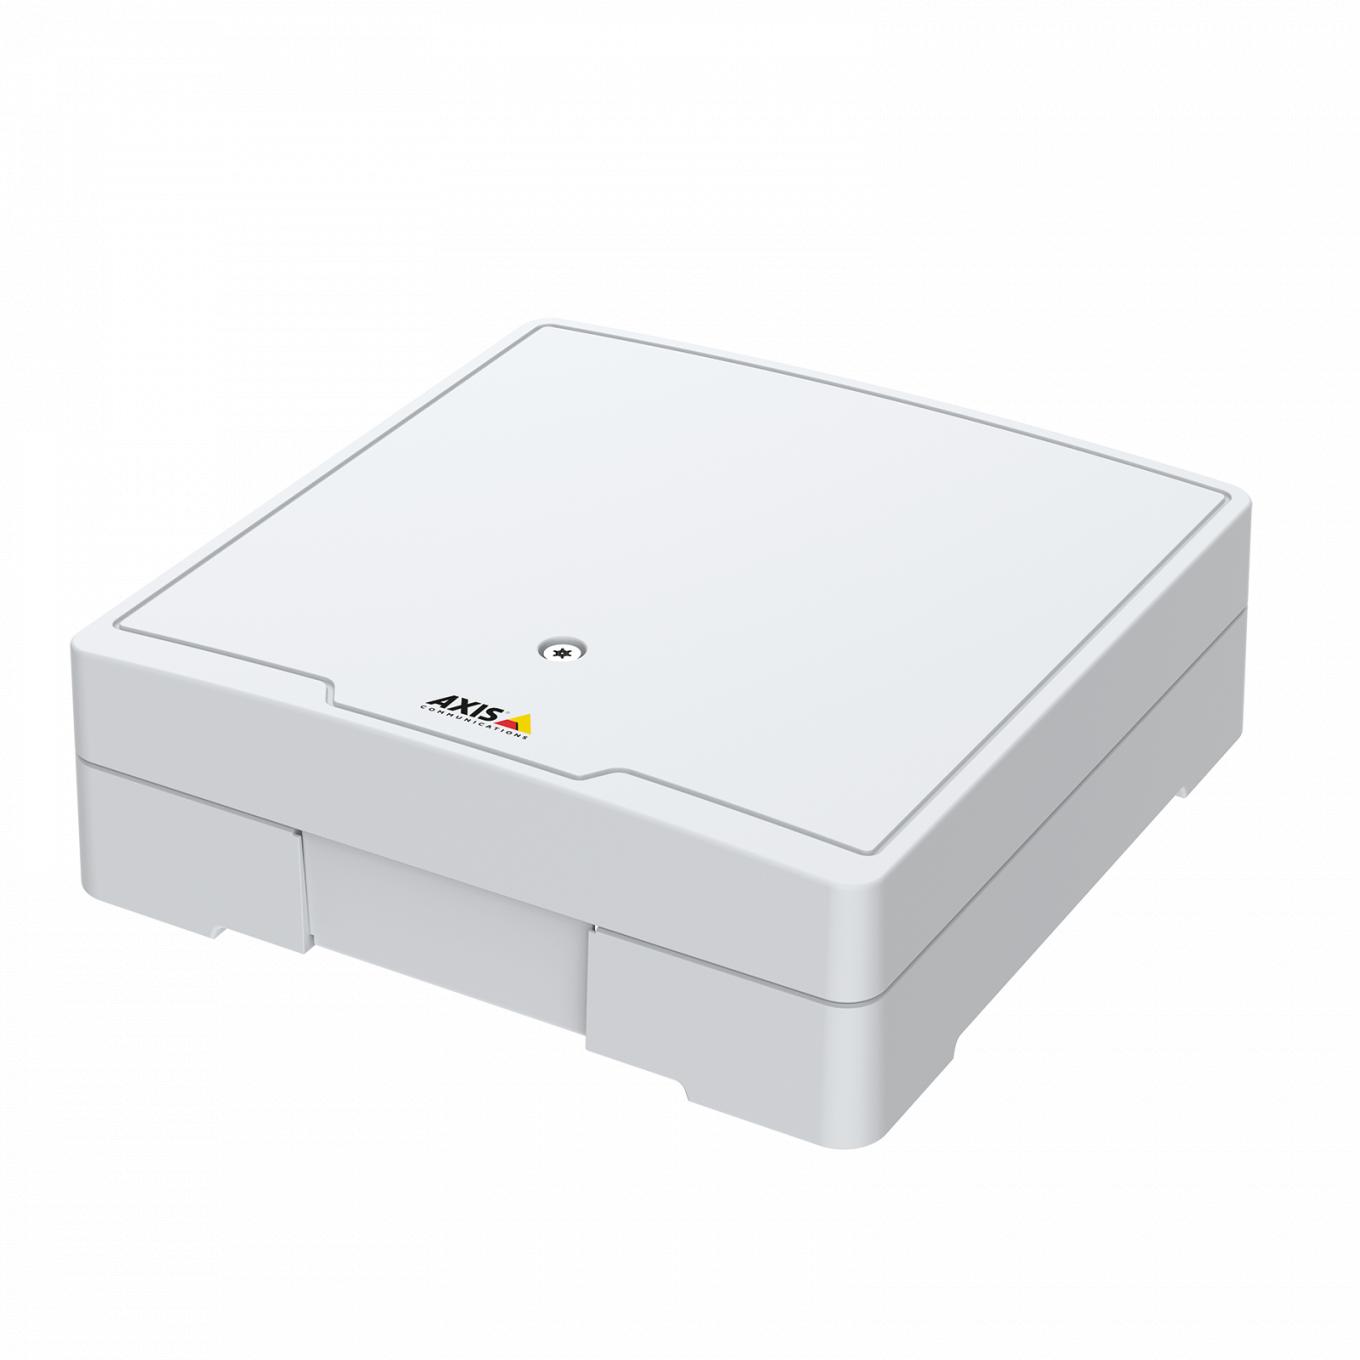 AXIS A1601 Network Door Controller, viewed from its left angle